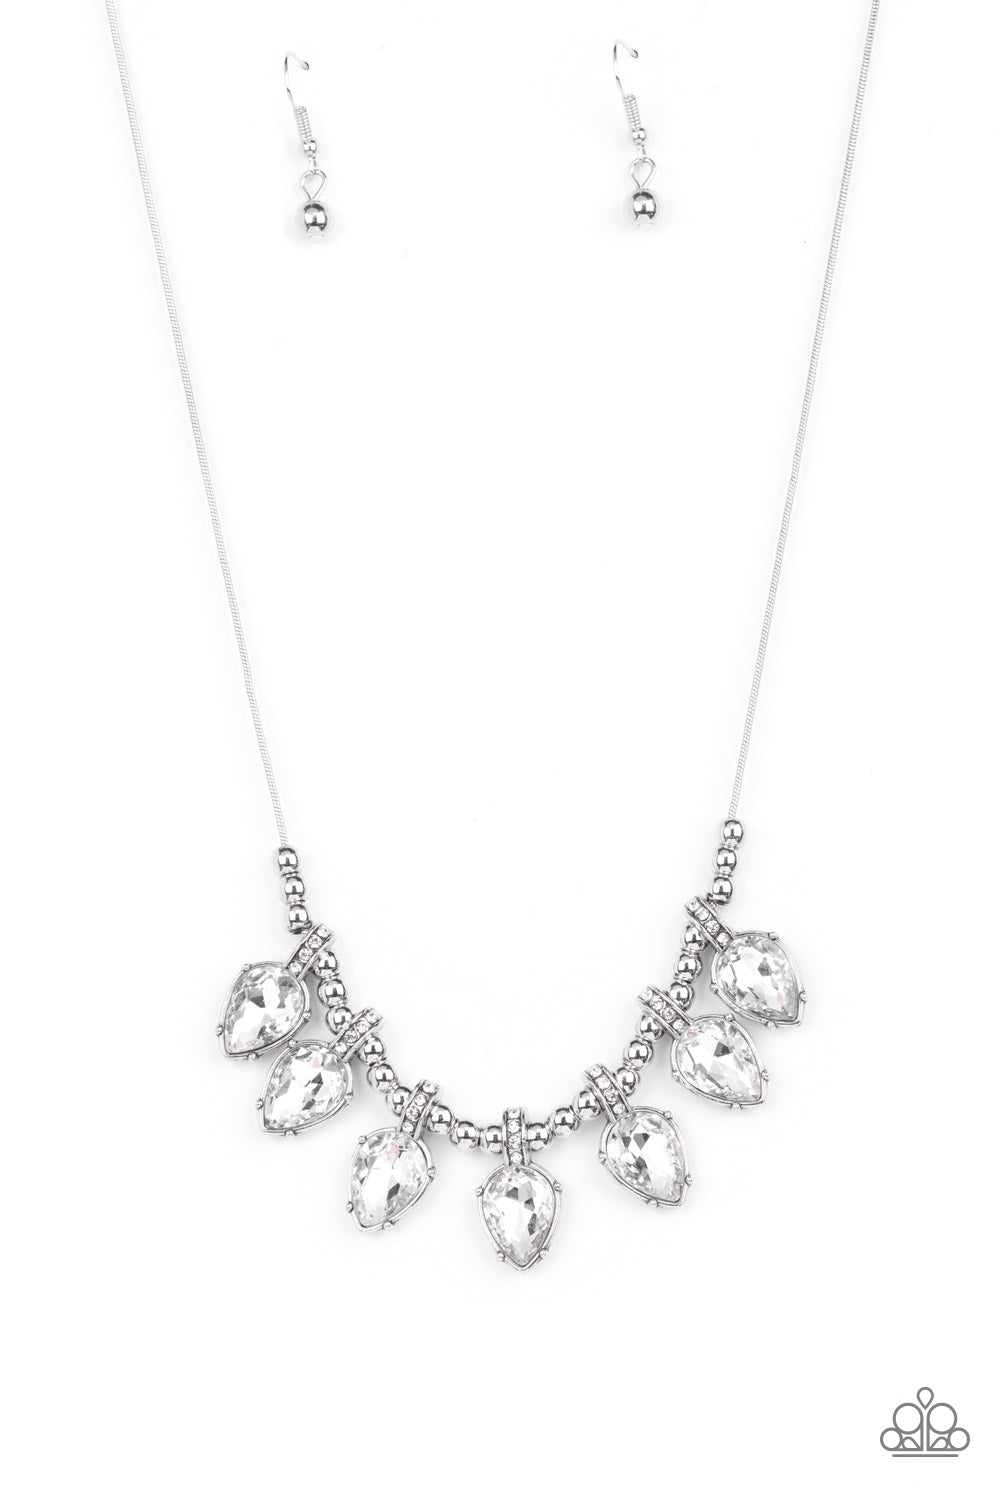 Paparazzi Necklace - Crown Jewel Couture - White